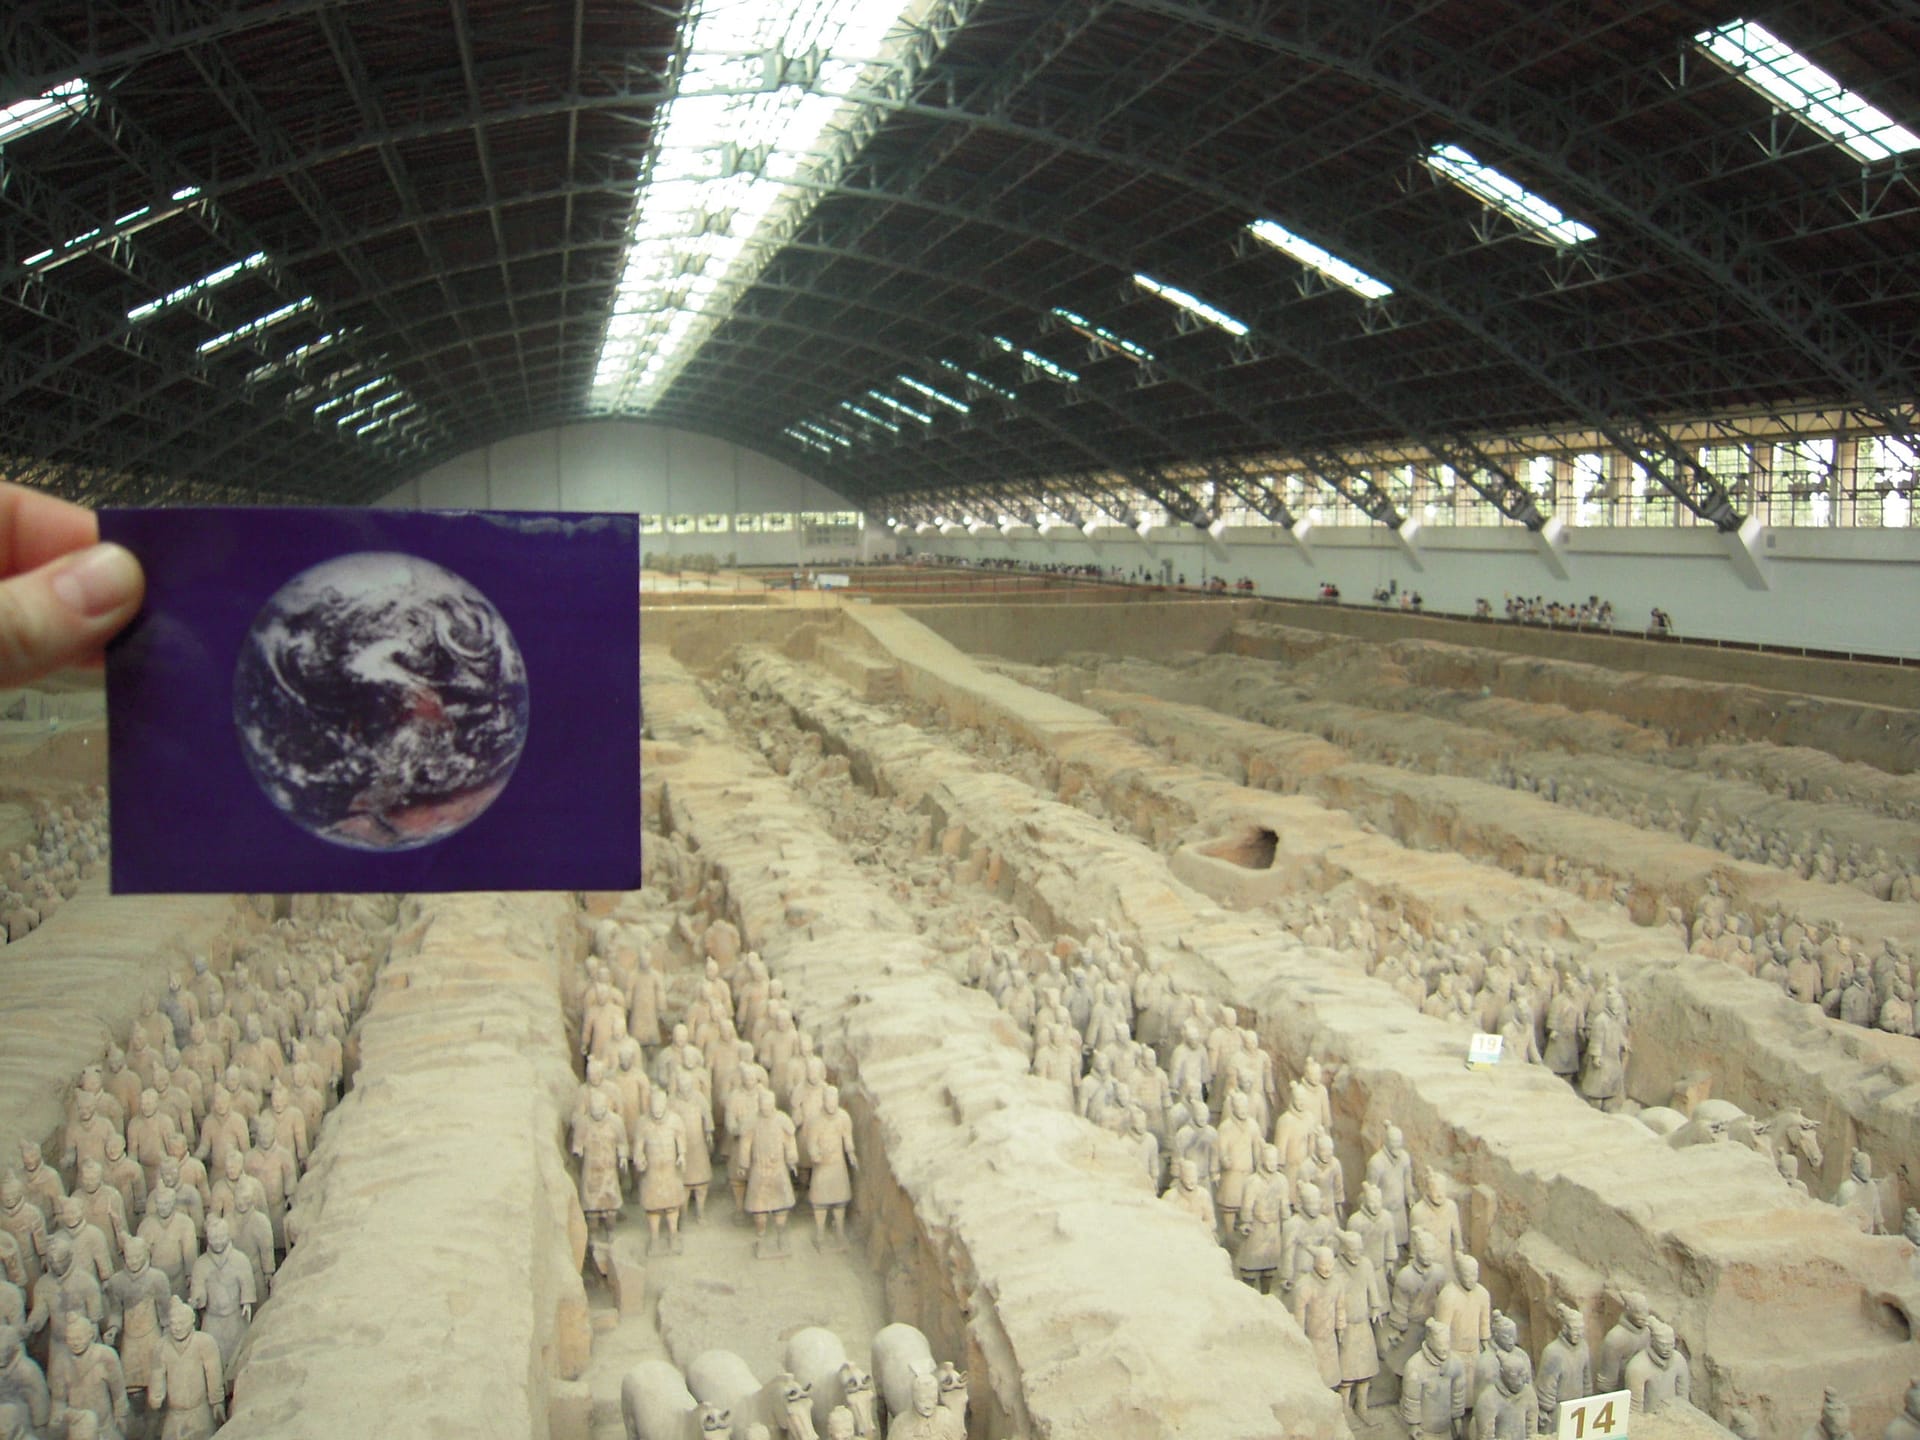 The Terracotta Army in Xi’An, China, was #EarthFlagged !